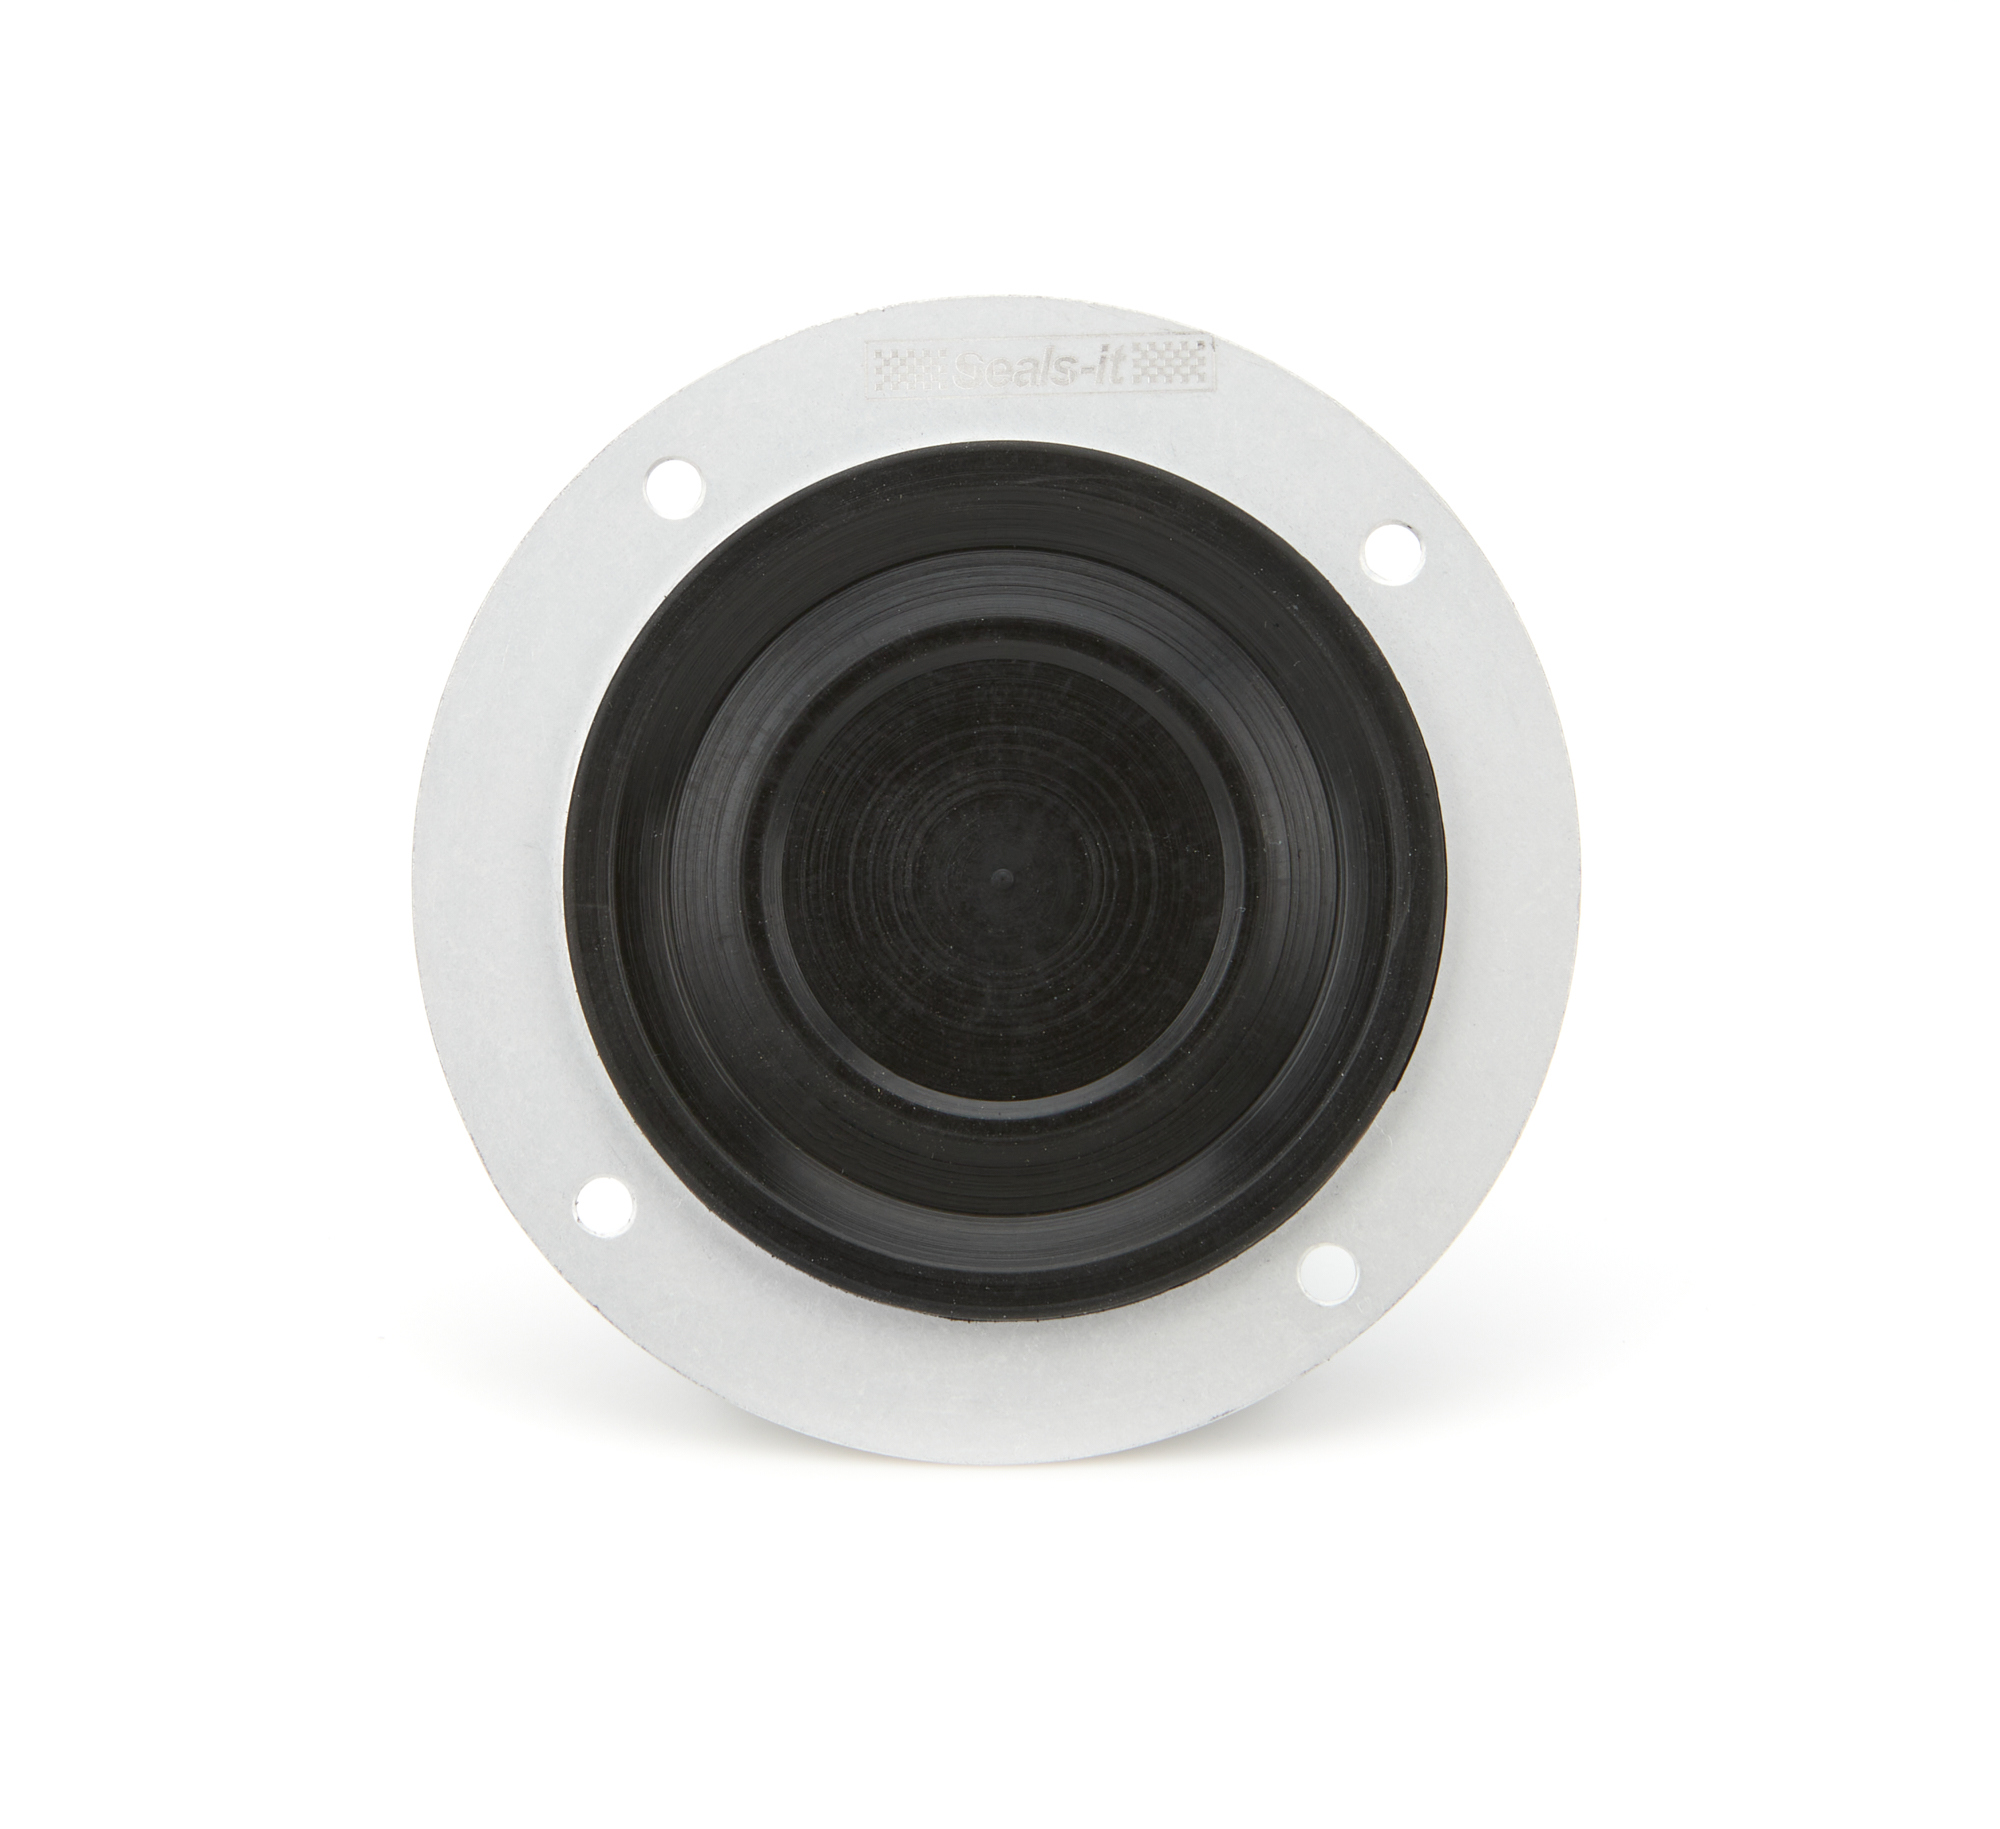 Earls 29G001ERL Firewall Grommet, Seals-It, No Hole, 3 in OD, 2.25 in ID, Aluminum / Rubber, Anodized, Each